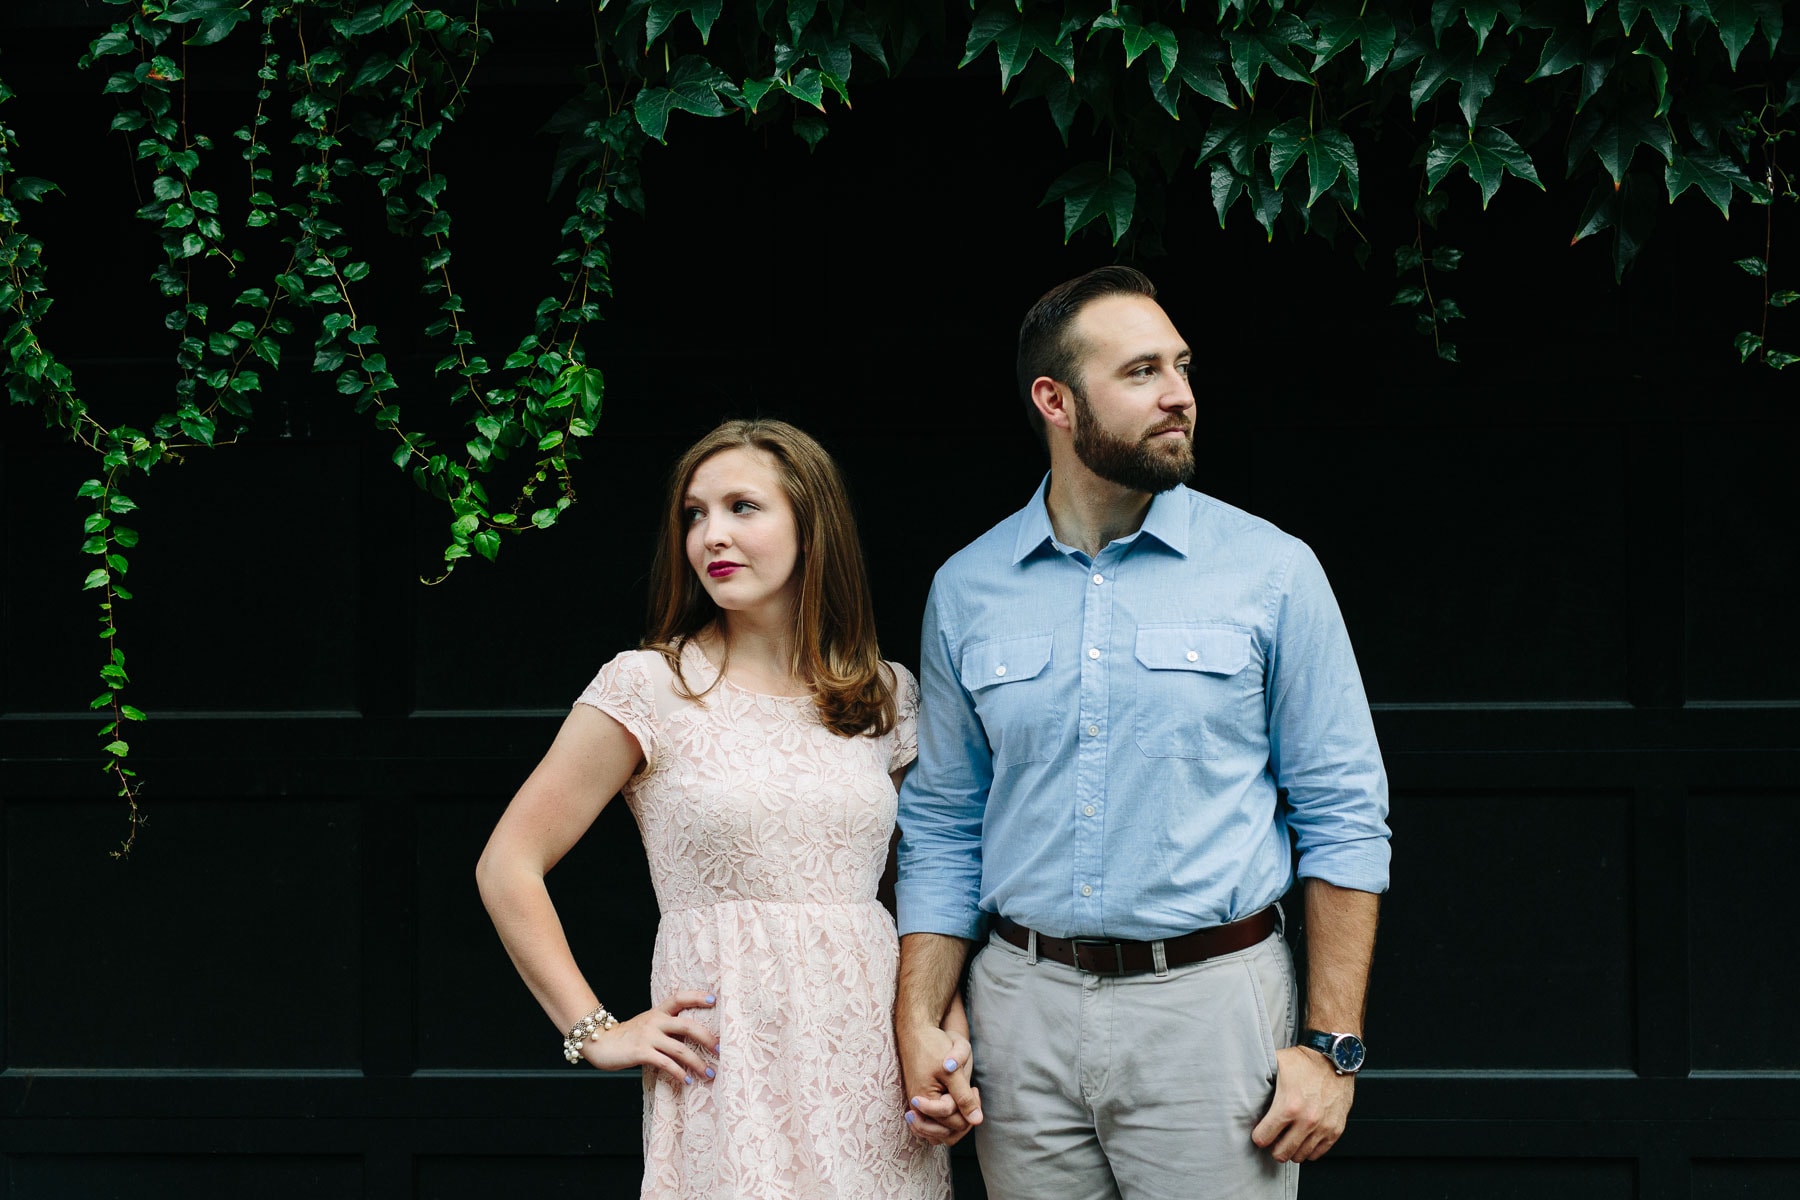 Peggy and Anthony's engagement photography session in Boston's Beacon Hill neighborhood | Kelly Benvenuto Photography | Boston Engagement Photographer